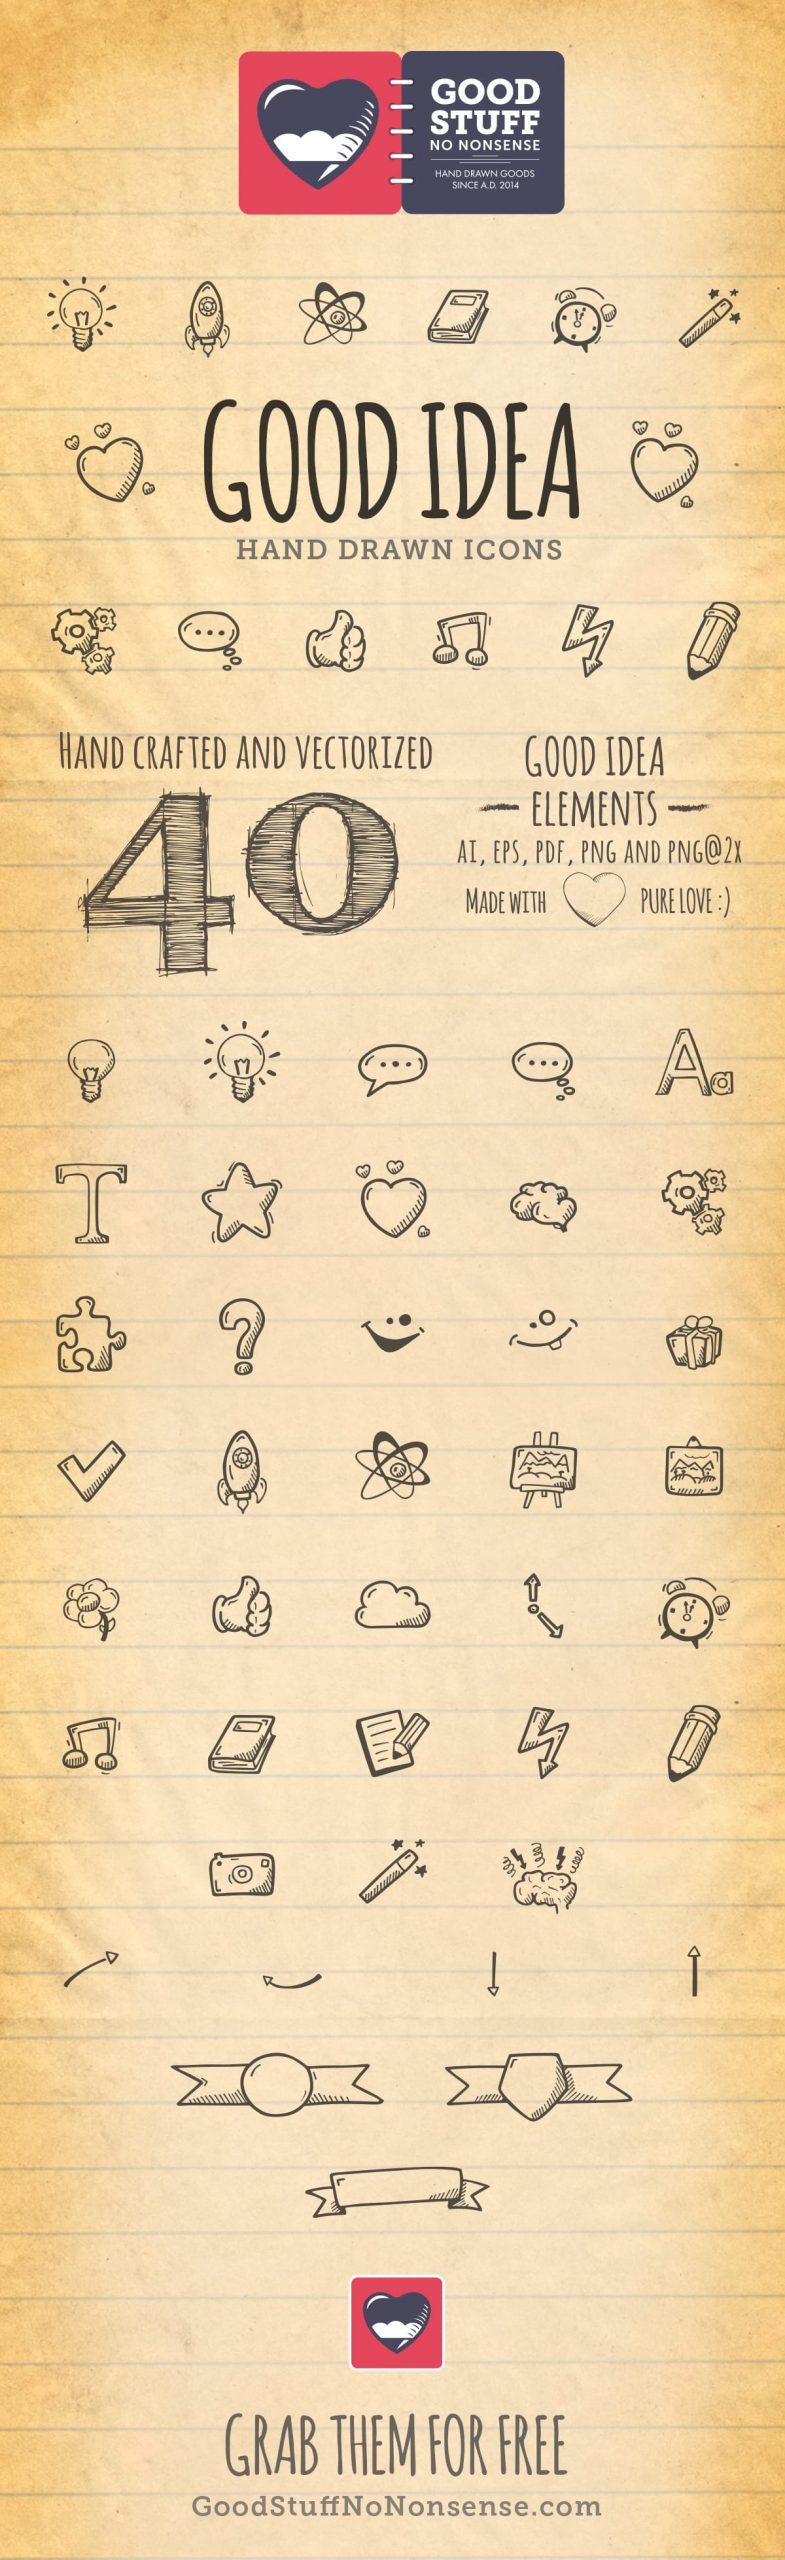 Free Hand Drawn Icons Good Idea Icons Vector Pack Main